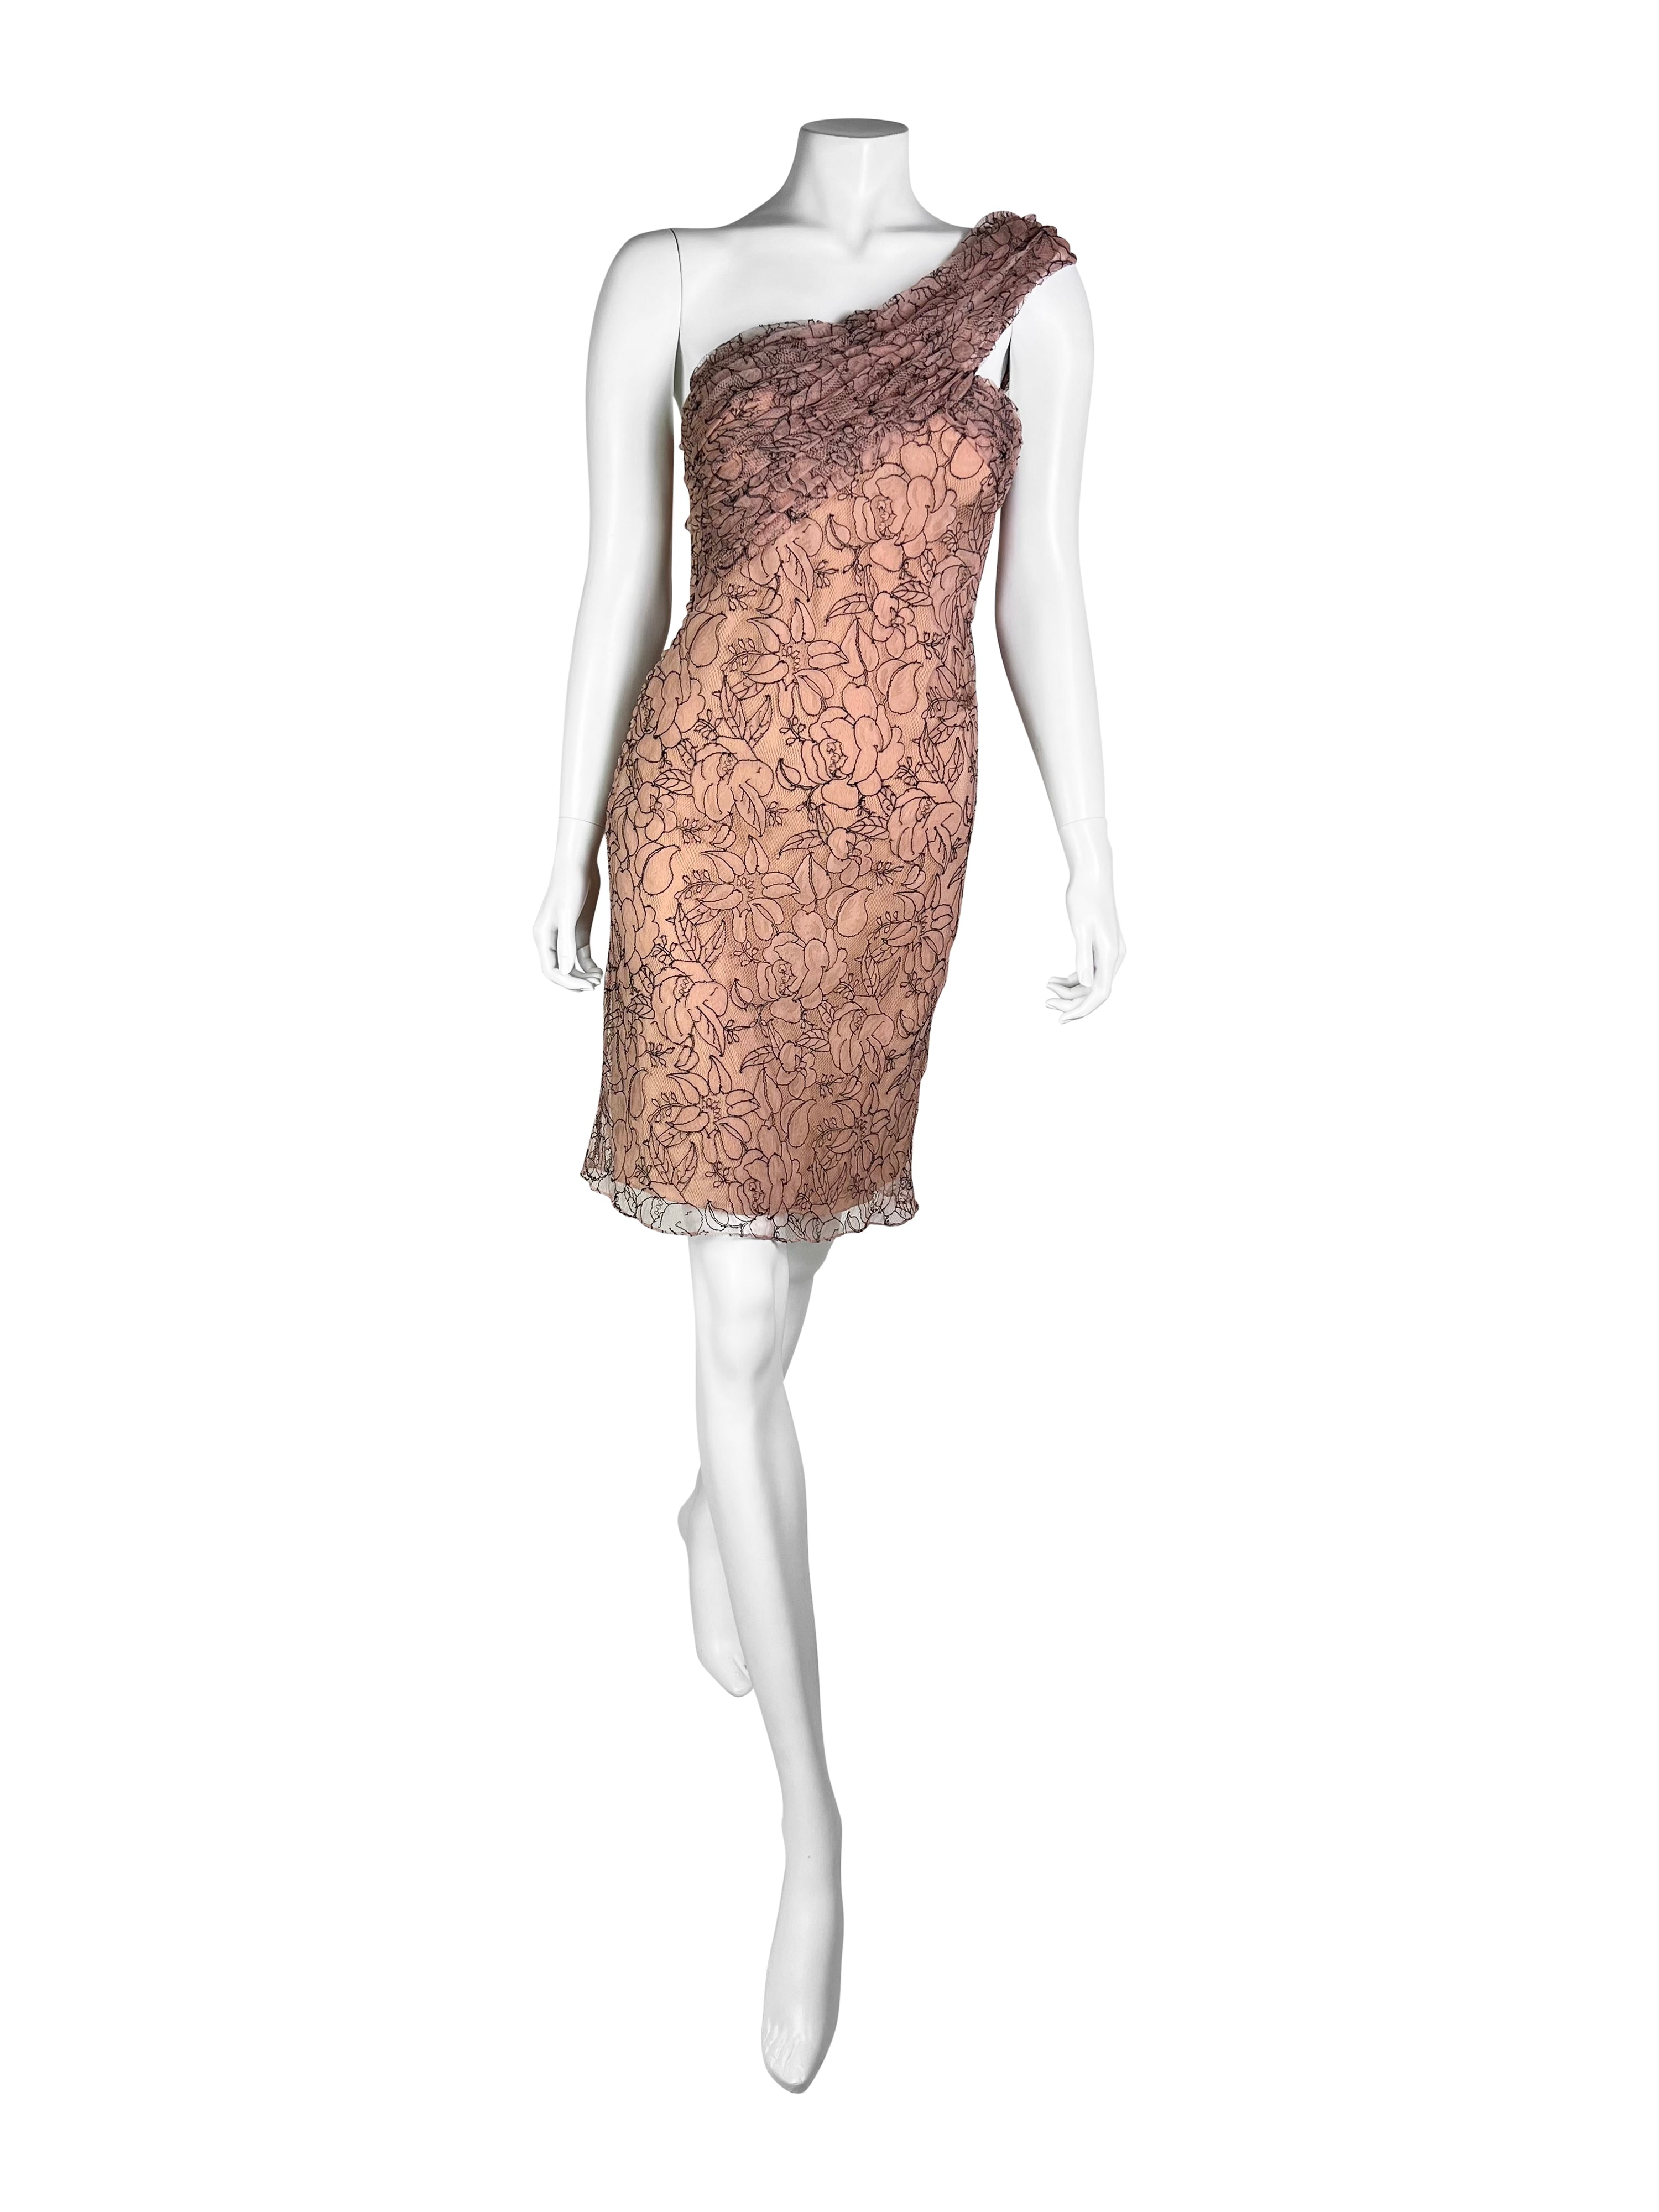 Dior Spring 2006 Lace Dress